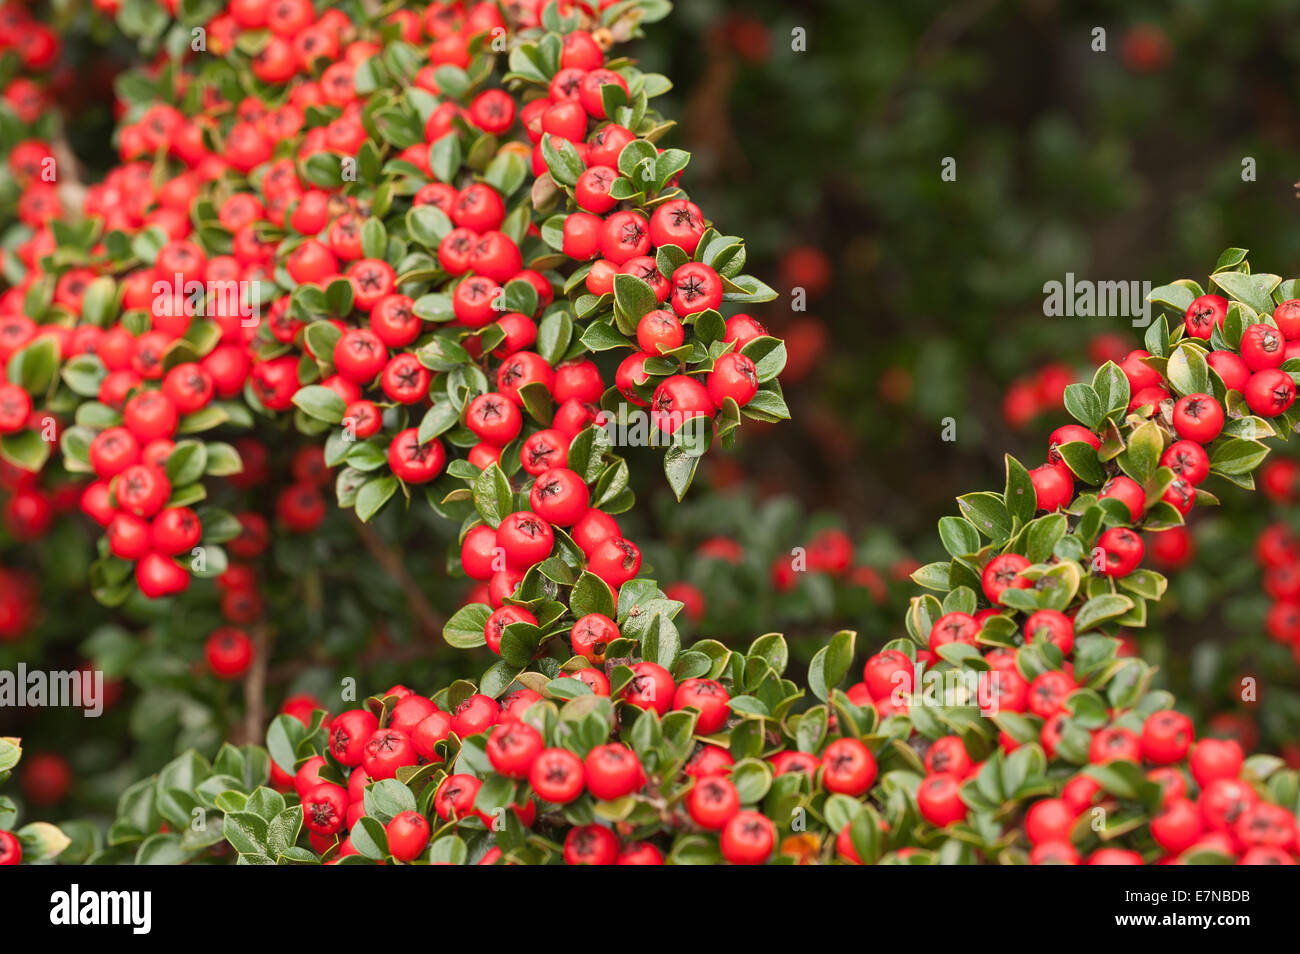 Abundant line lines of red berries cottoneaster shrub a great food source for birds over winter shallow depth of field Stock Photo